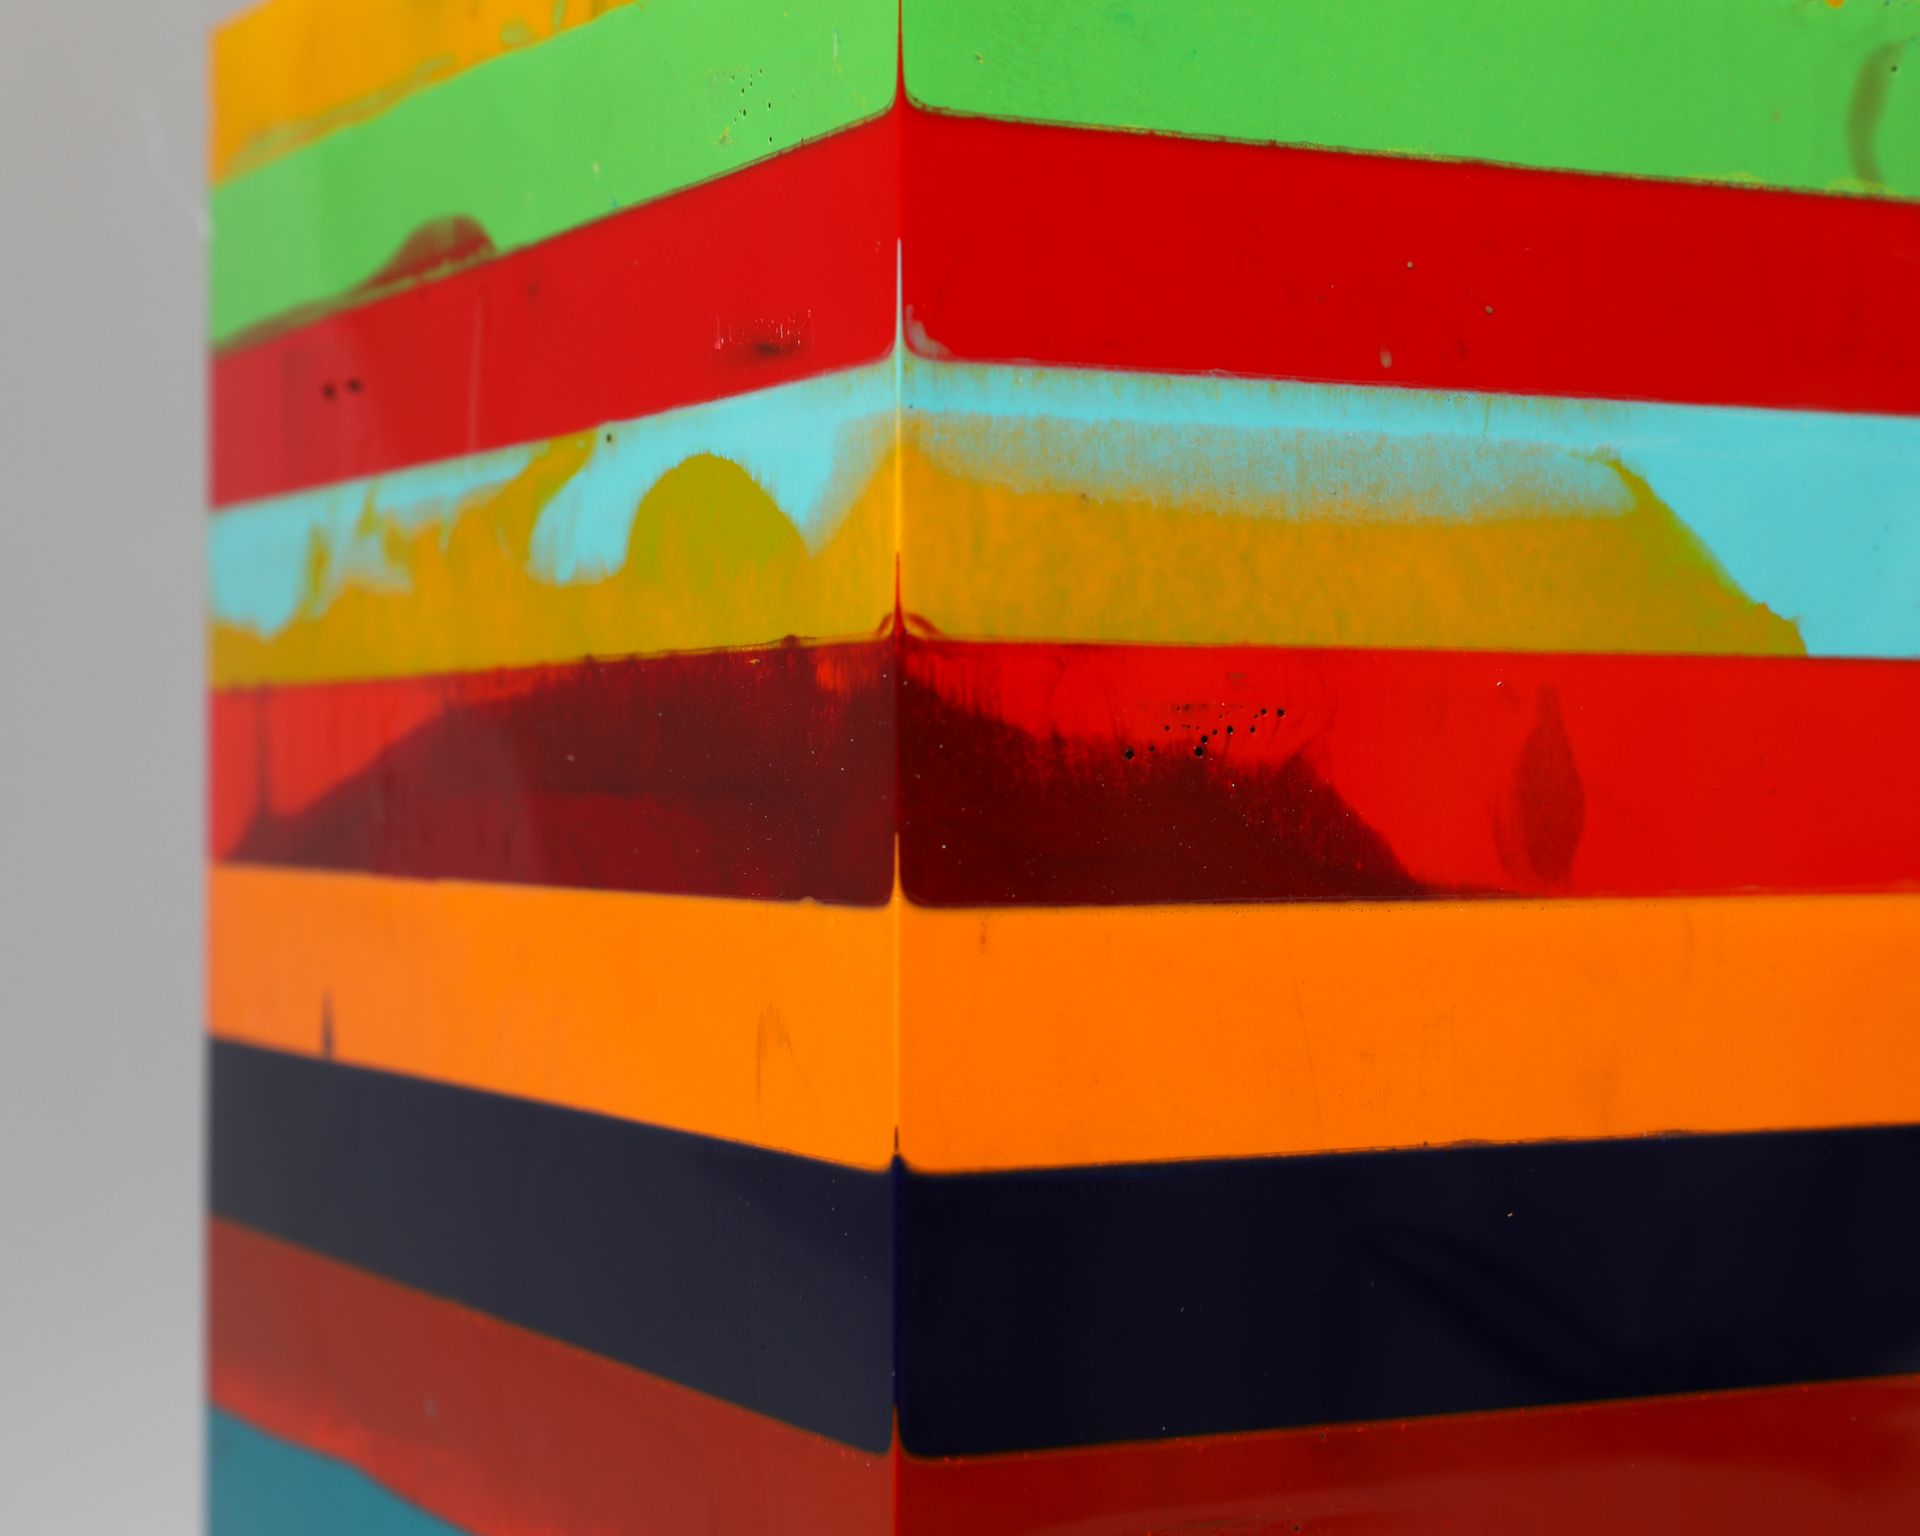 Markus Linnenbrink*, Mexicogelb, 2002, Solid Cube, Colored epoxy resin - Image 2 of 5